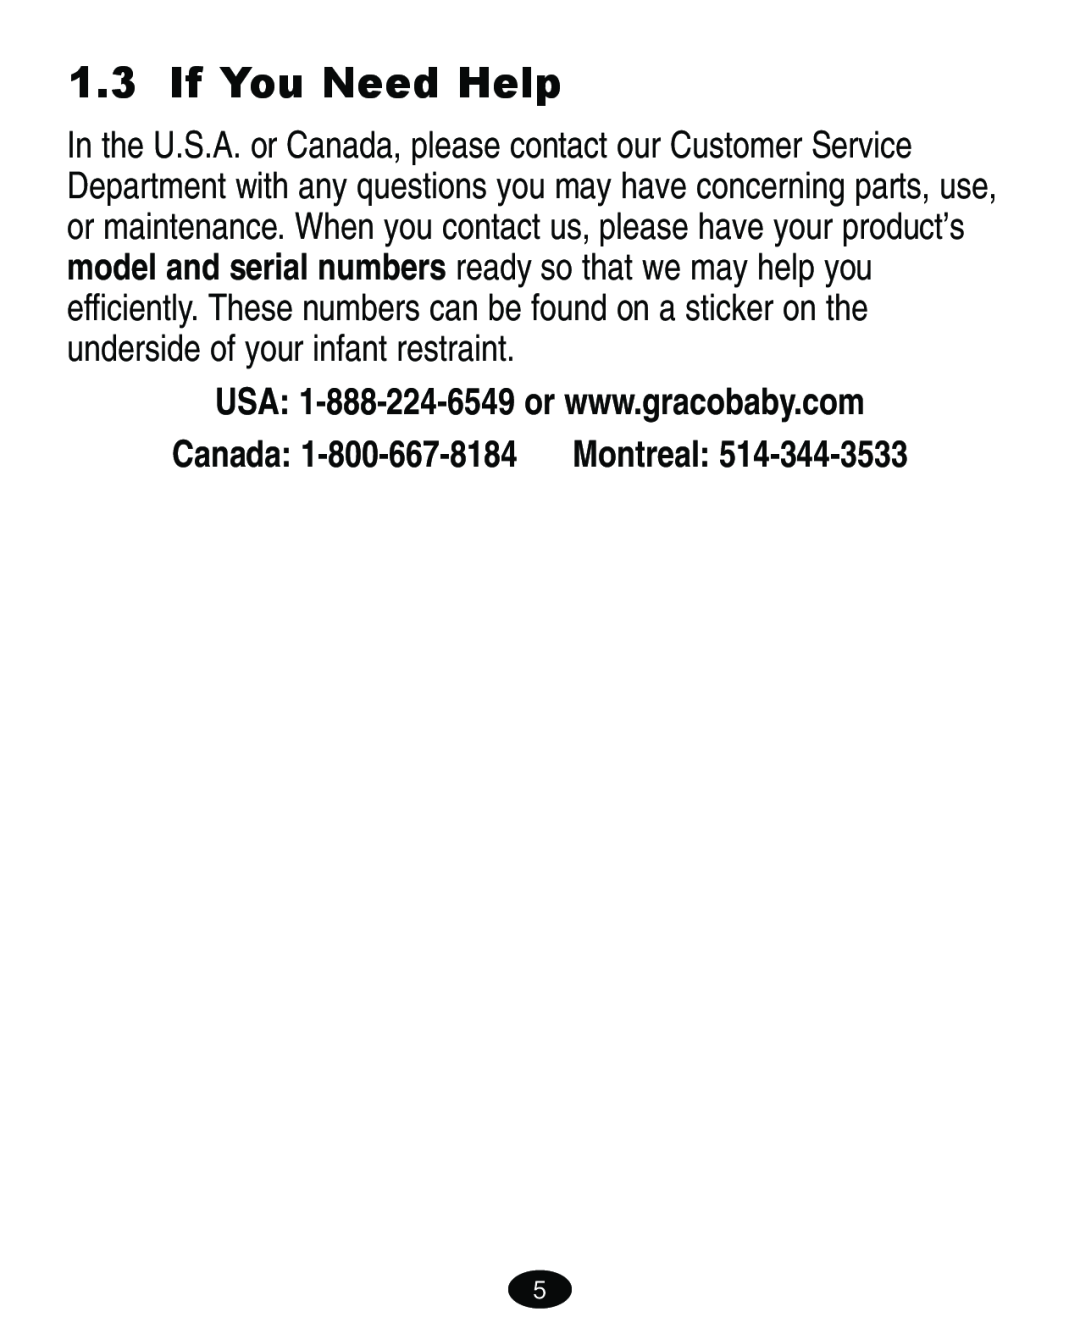 Graco 4460402 manual If You Need Help, Canada, Montreal 